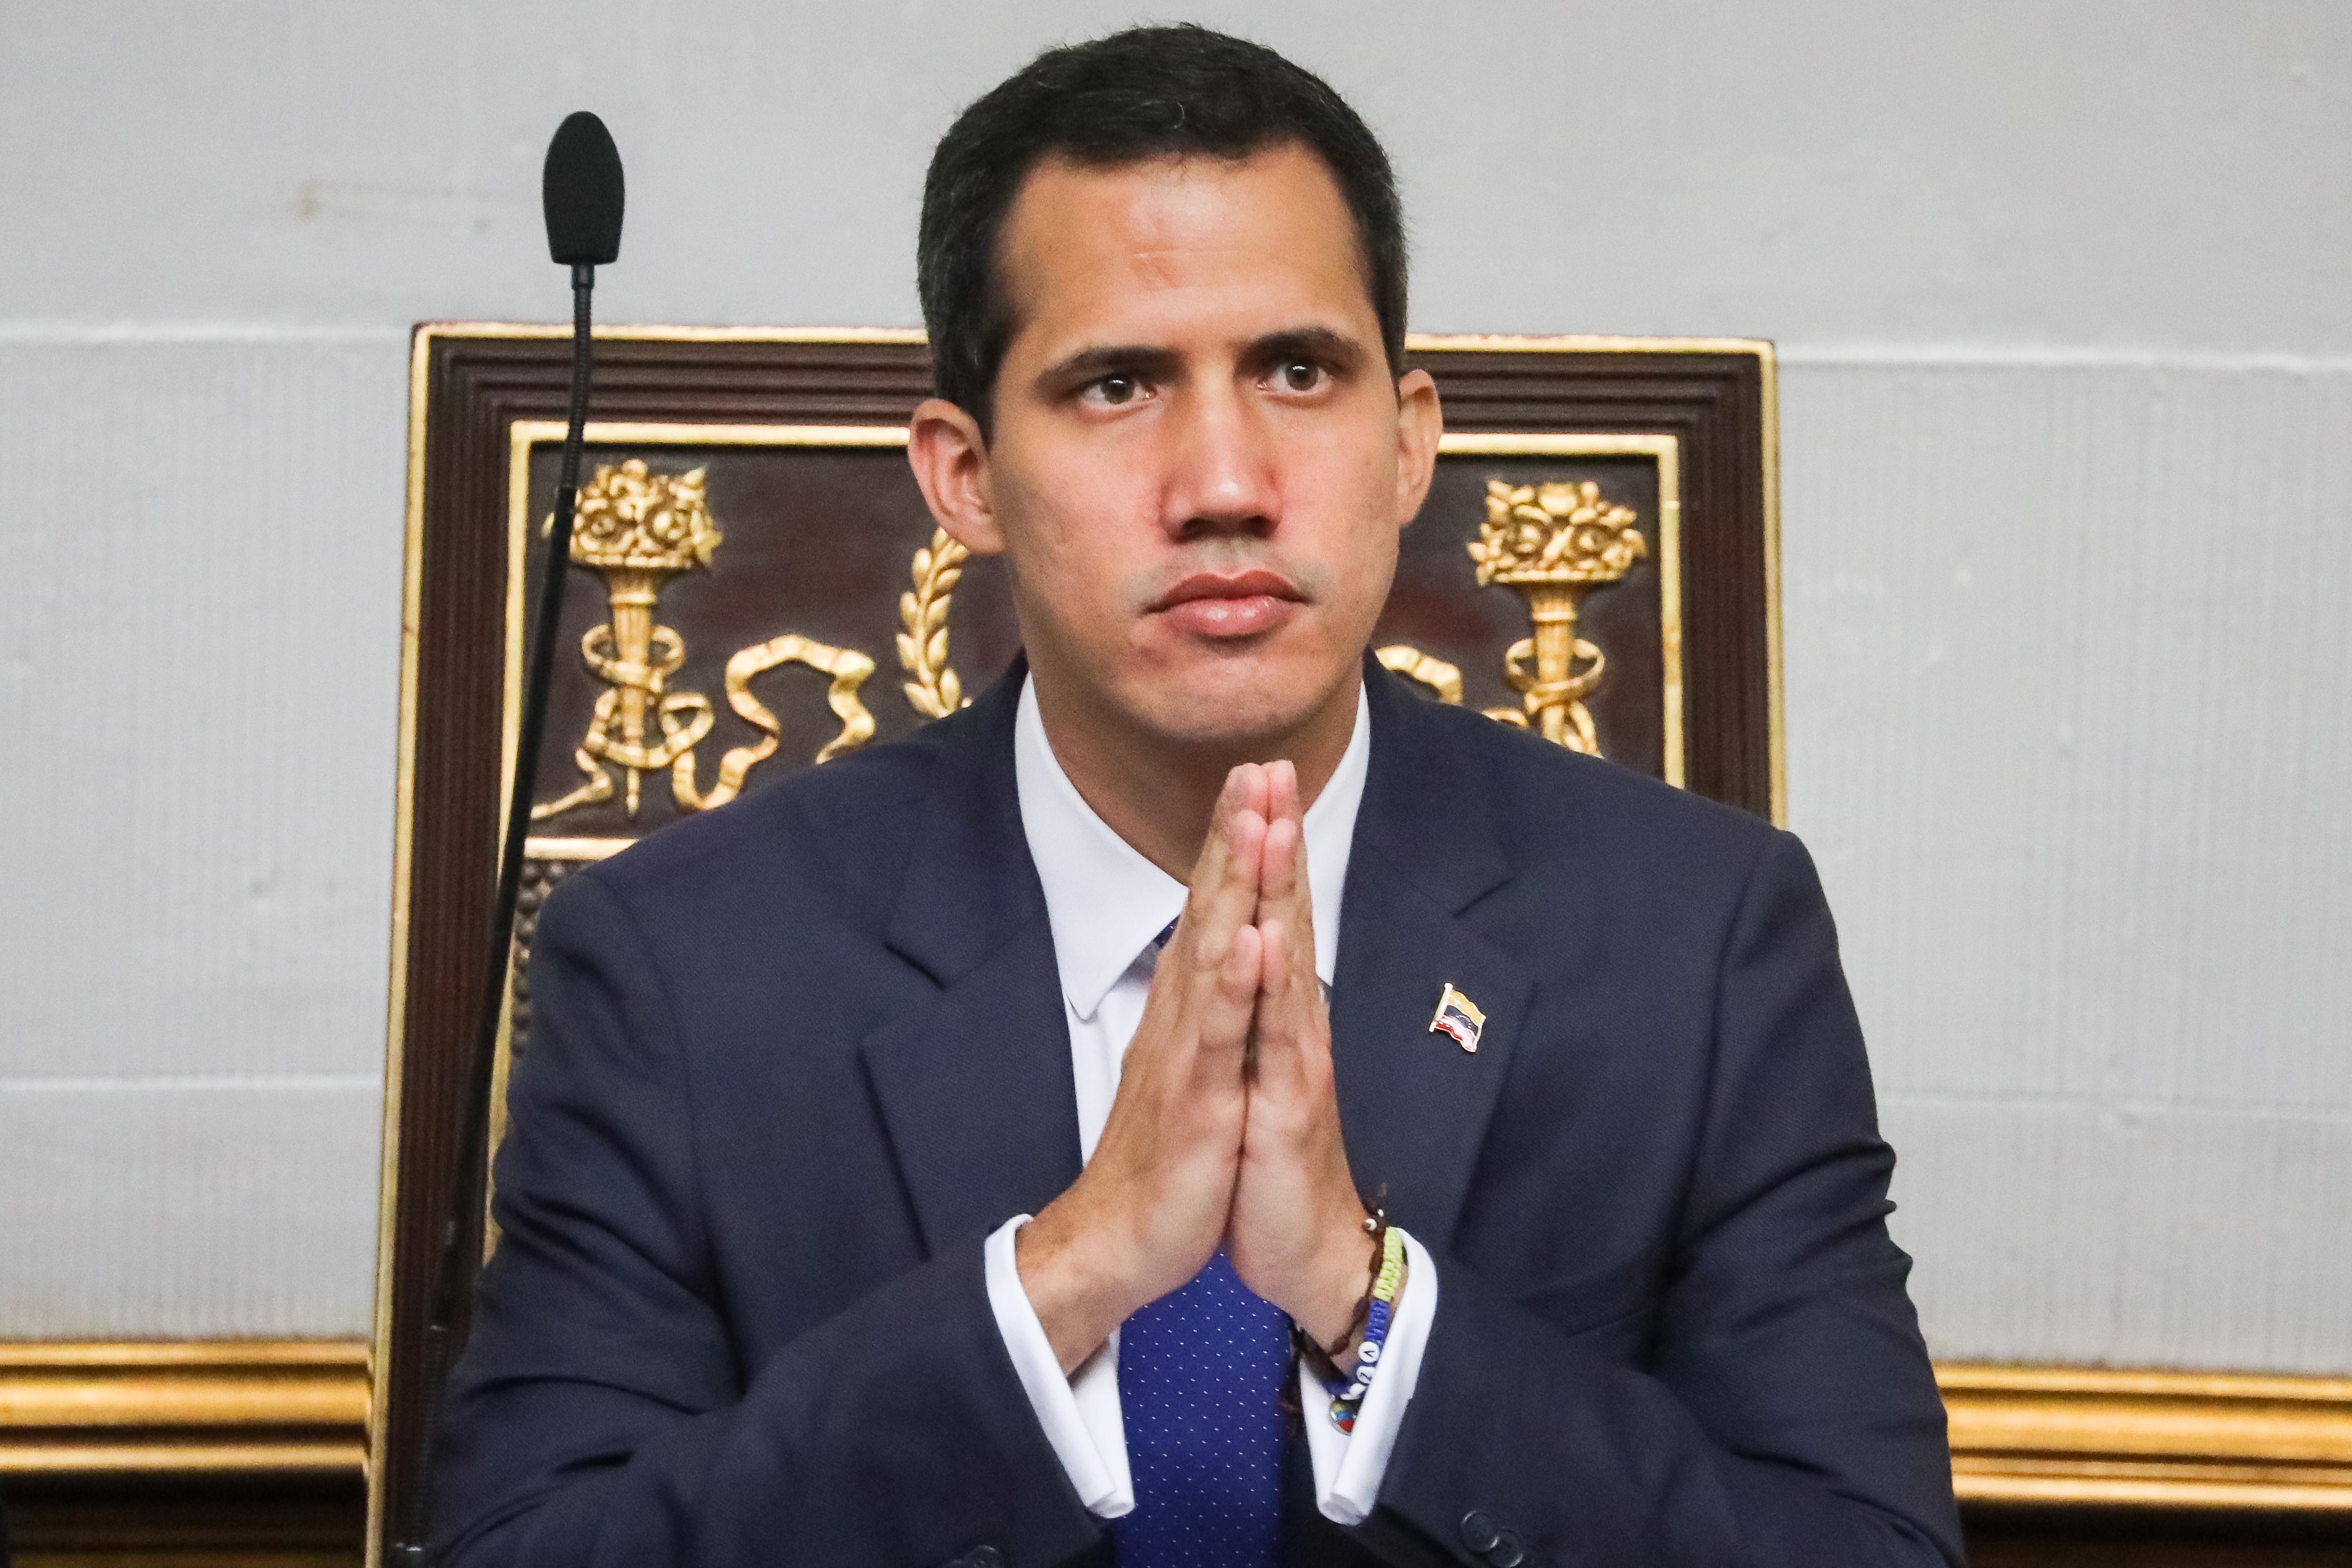 epa07346145 President of the Venezuelan National Assembly Juan Guaido takes part in a session of the body, in Caracas, Venezuela, 05 February 2019, during which he stated that the best for Russia and China is a change of Government in Venezuela. Venezuela's President Maduro and his opponent National Assembly leader Juan Guaido have called on their supporters to take to the streets as international pressure increased on Maduro to resign. Guiado had declared himself interim president of Venezuela on 23 January and promised to guide the country toward new election as he consider last May's election not valid.  EPA/Miguel Gutierrez